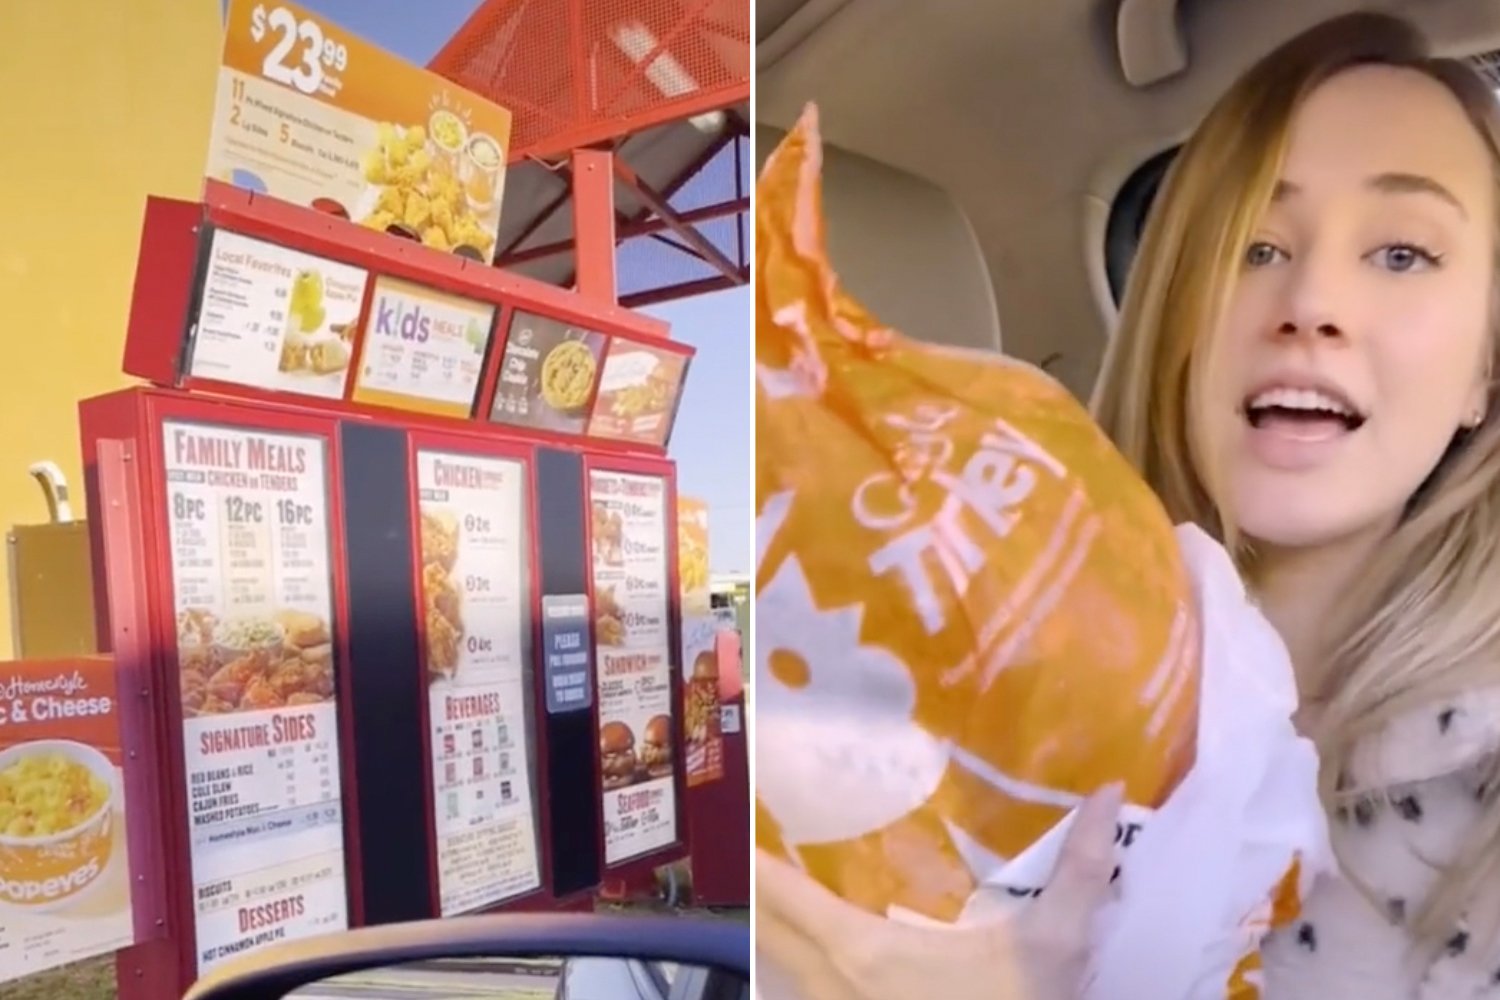 Popeyes' customer reveals you can get a whole turkey in the drive-thru - here's how